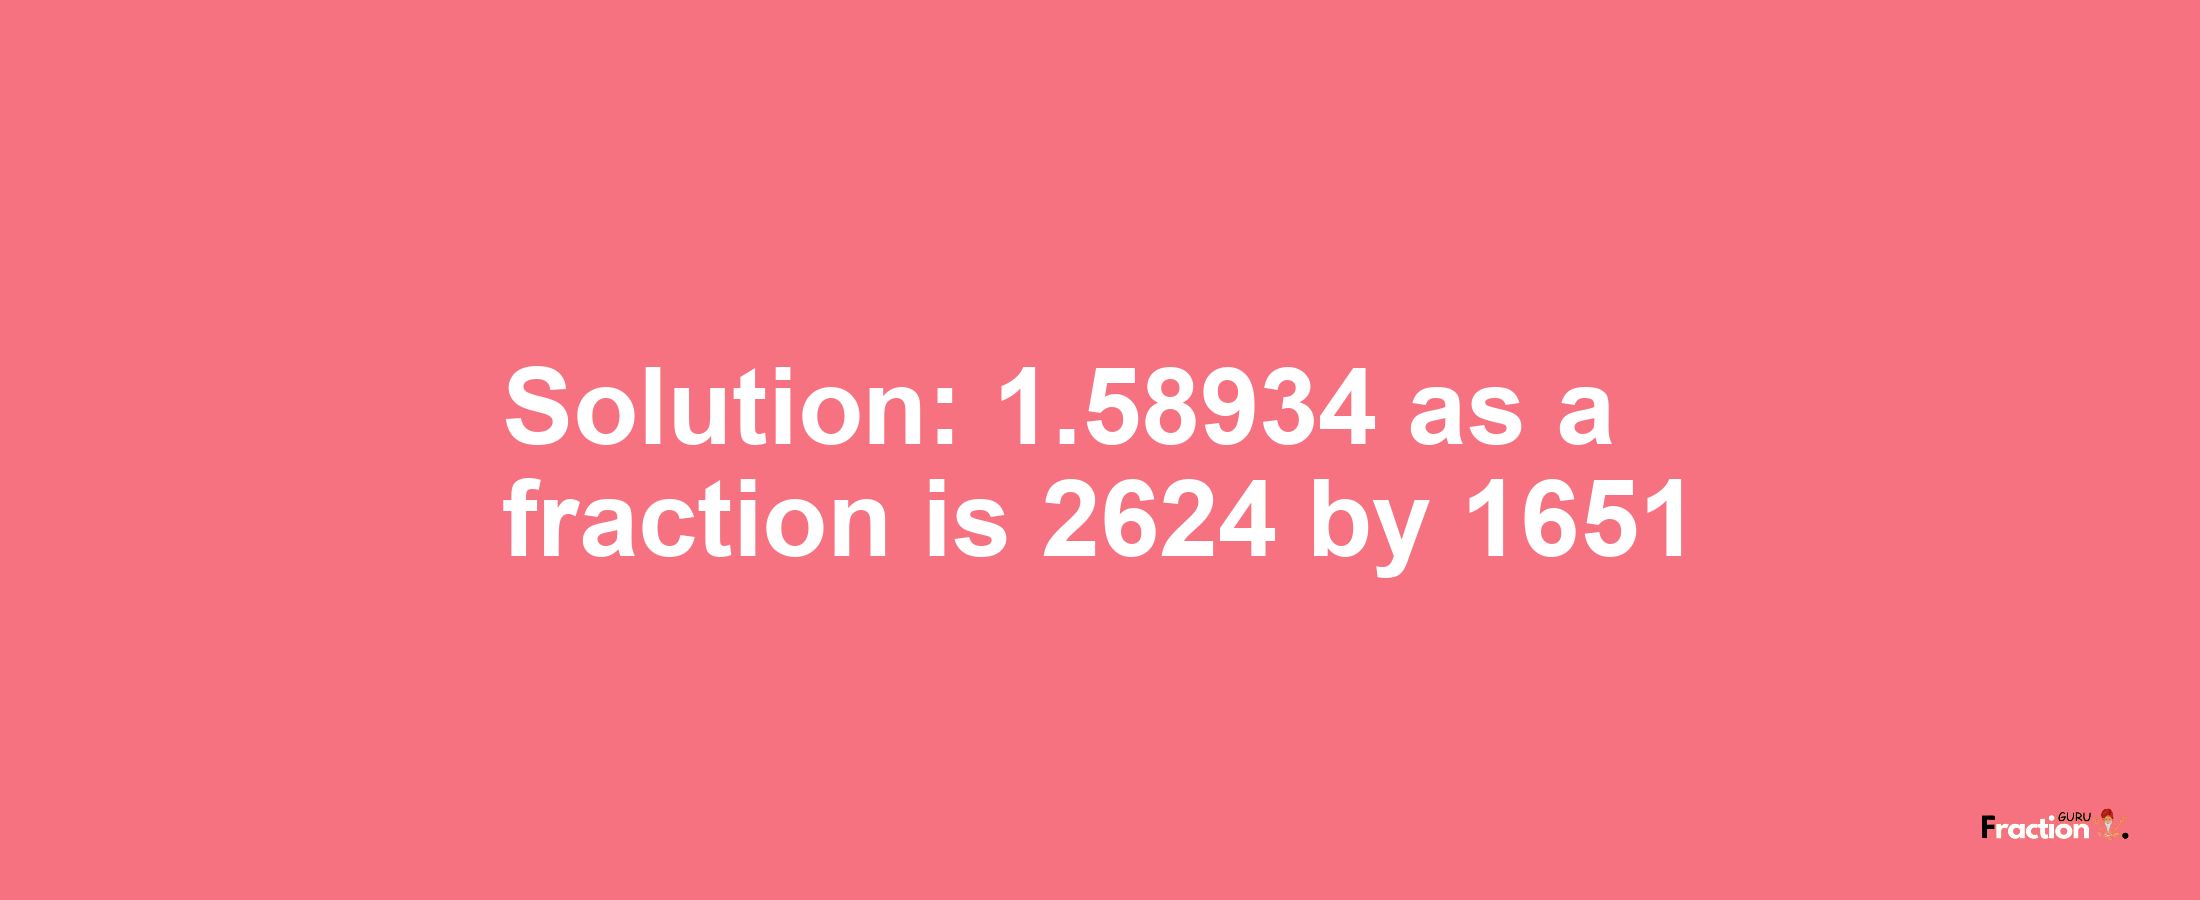 Solution:1.58934 as a fraction is 2624/1651